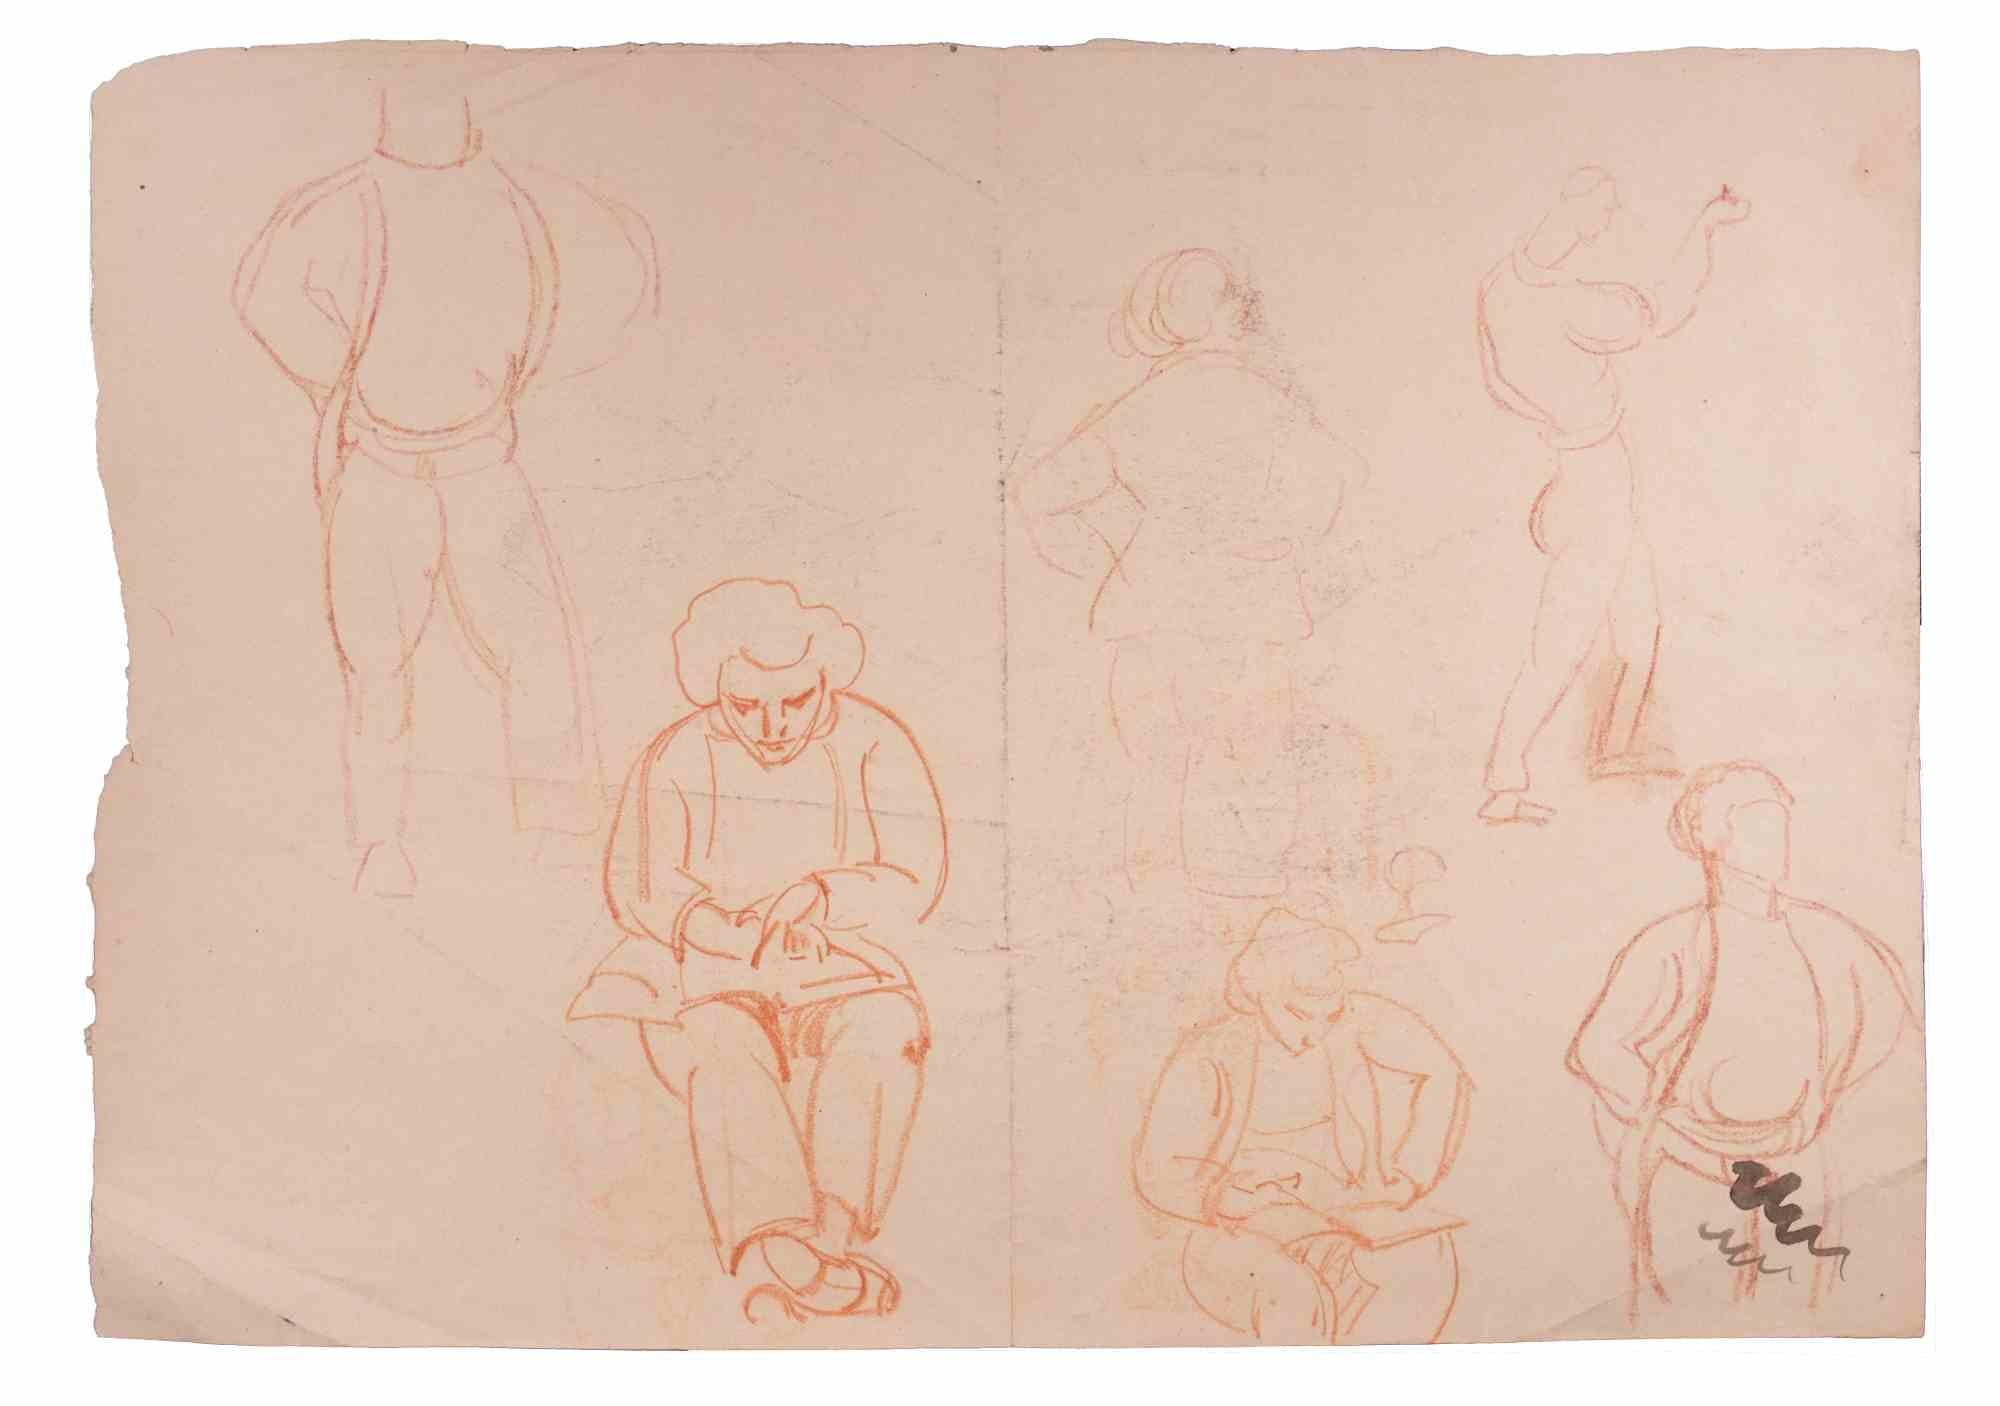 Unknown Figurative Art - Figures - Original Drawing - Early 20th Century